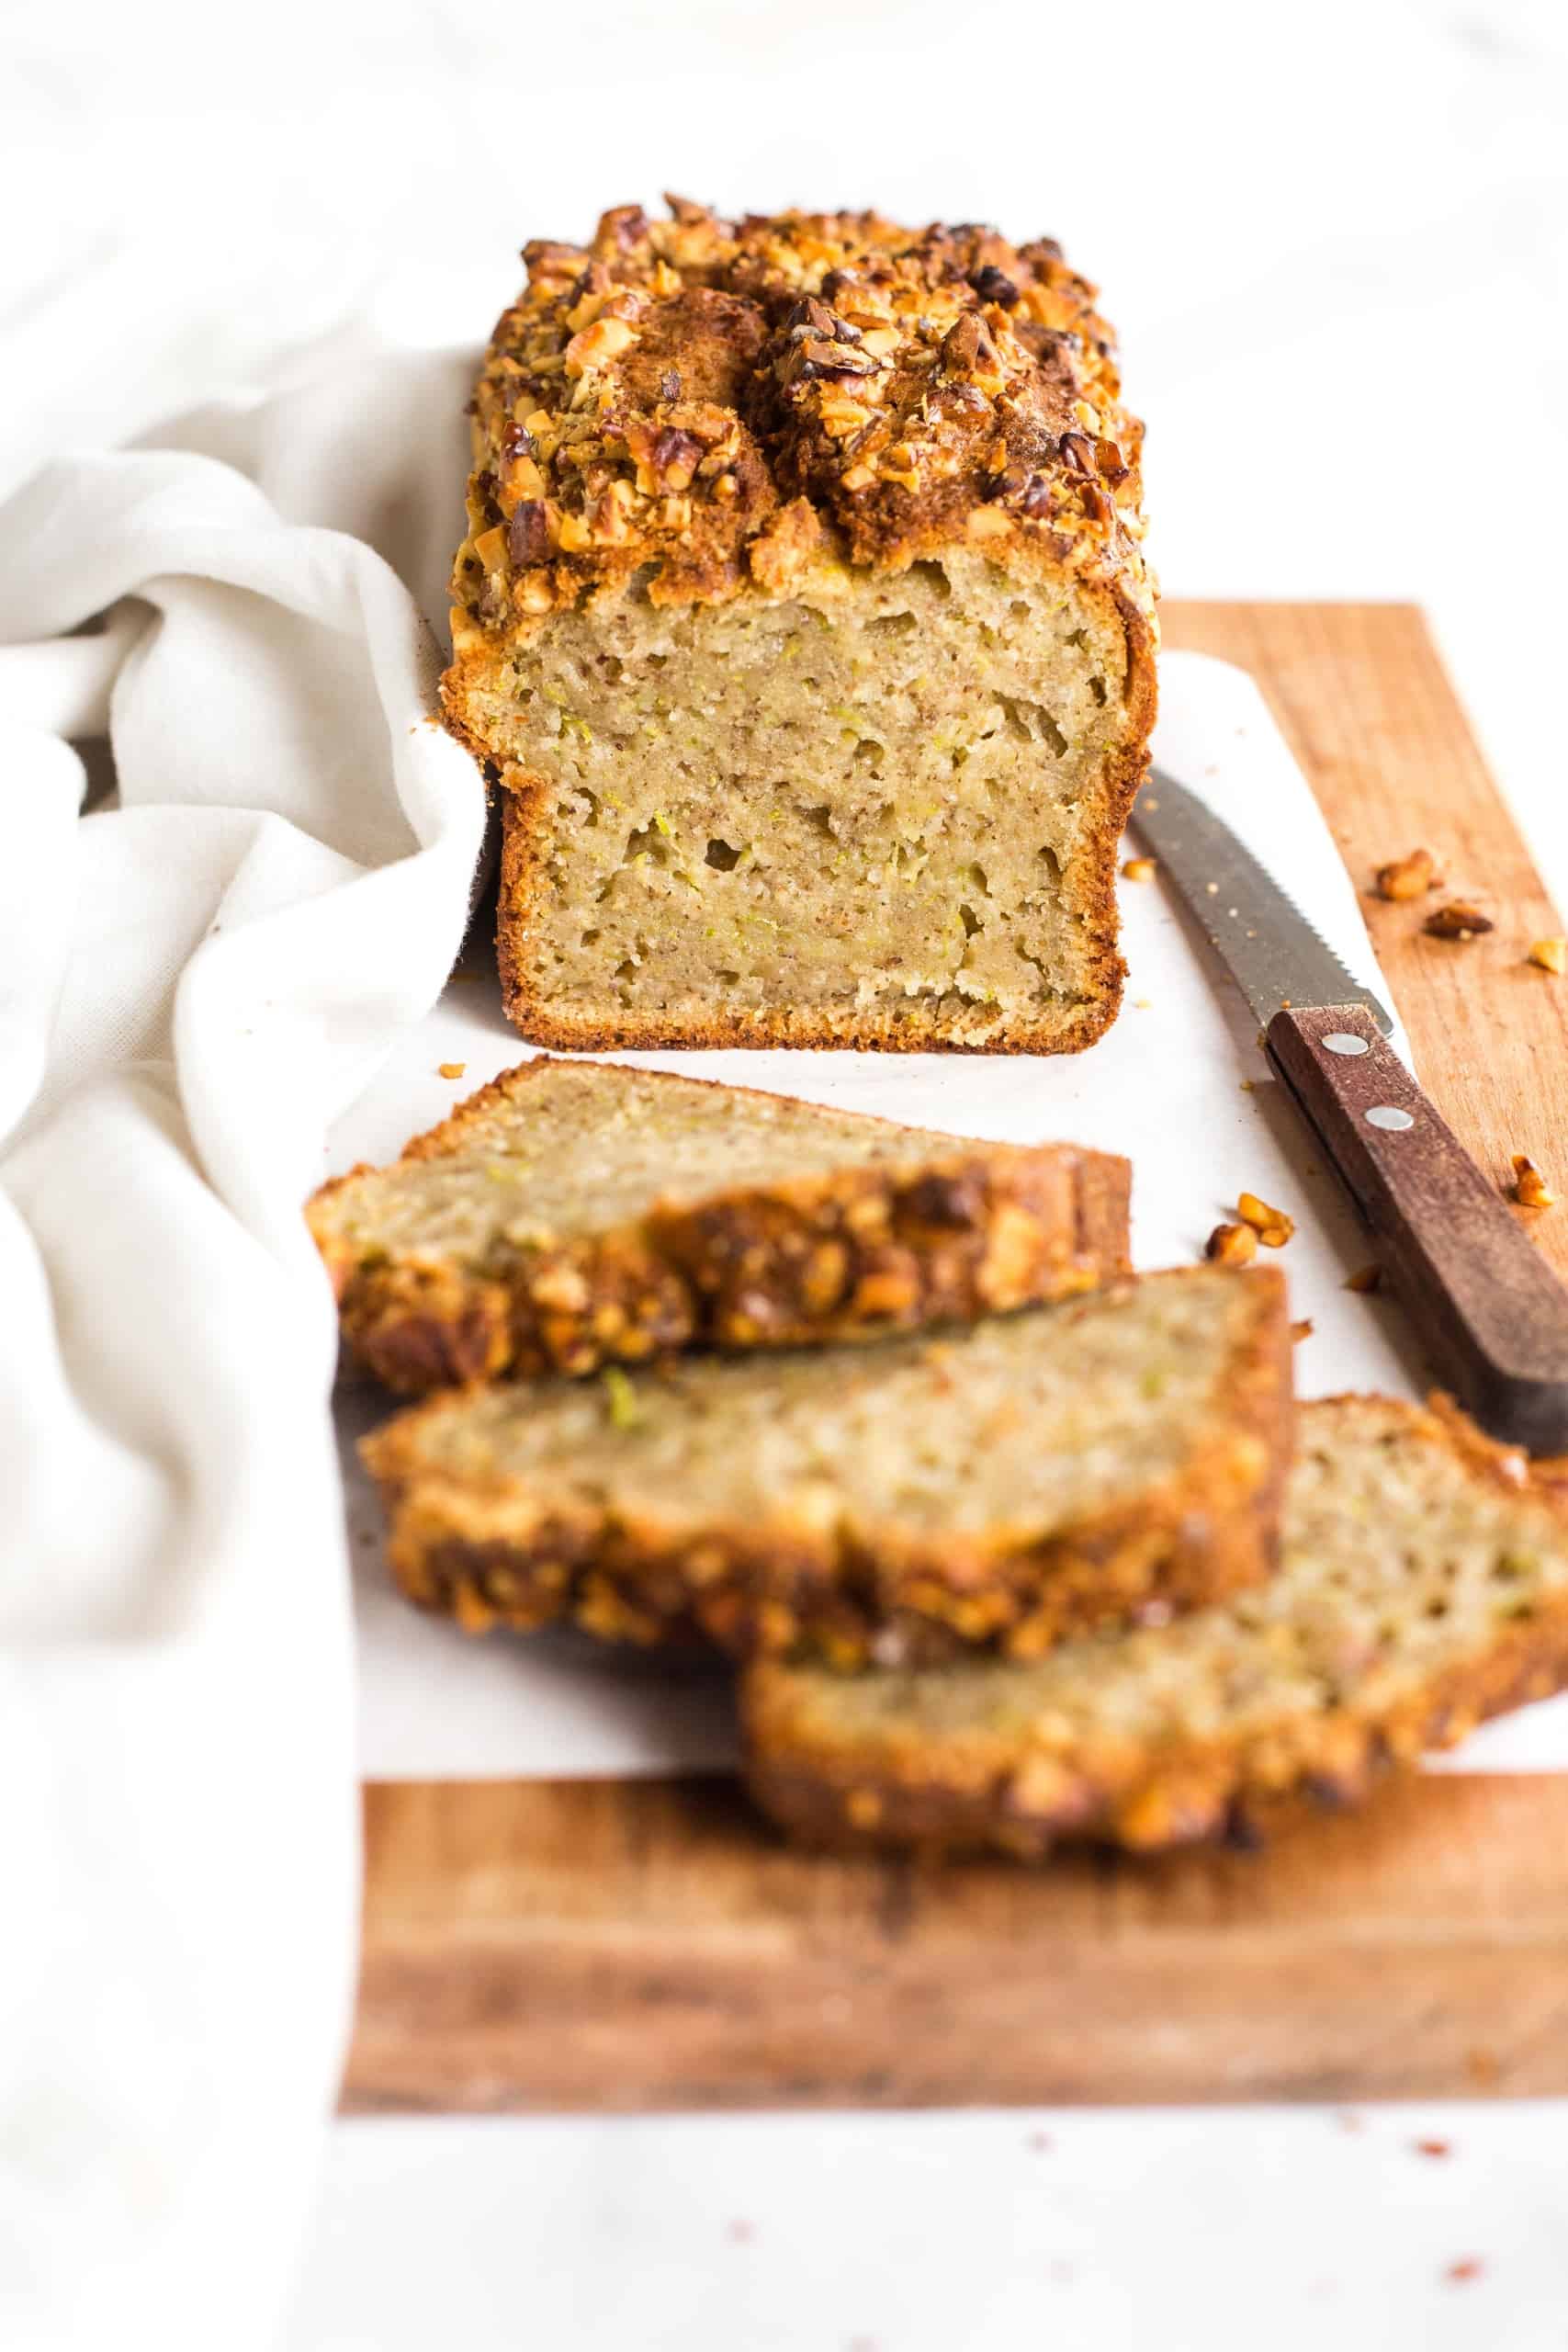 Half-sliced loaf of gluten-free dairy-free zucchini bread on a parchment-lined wooden board.